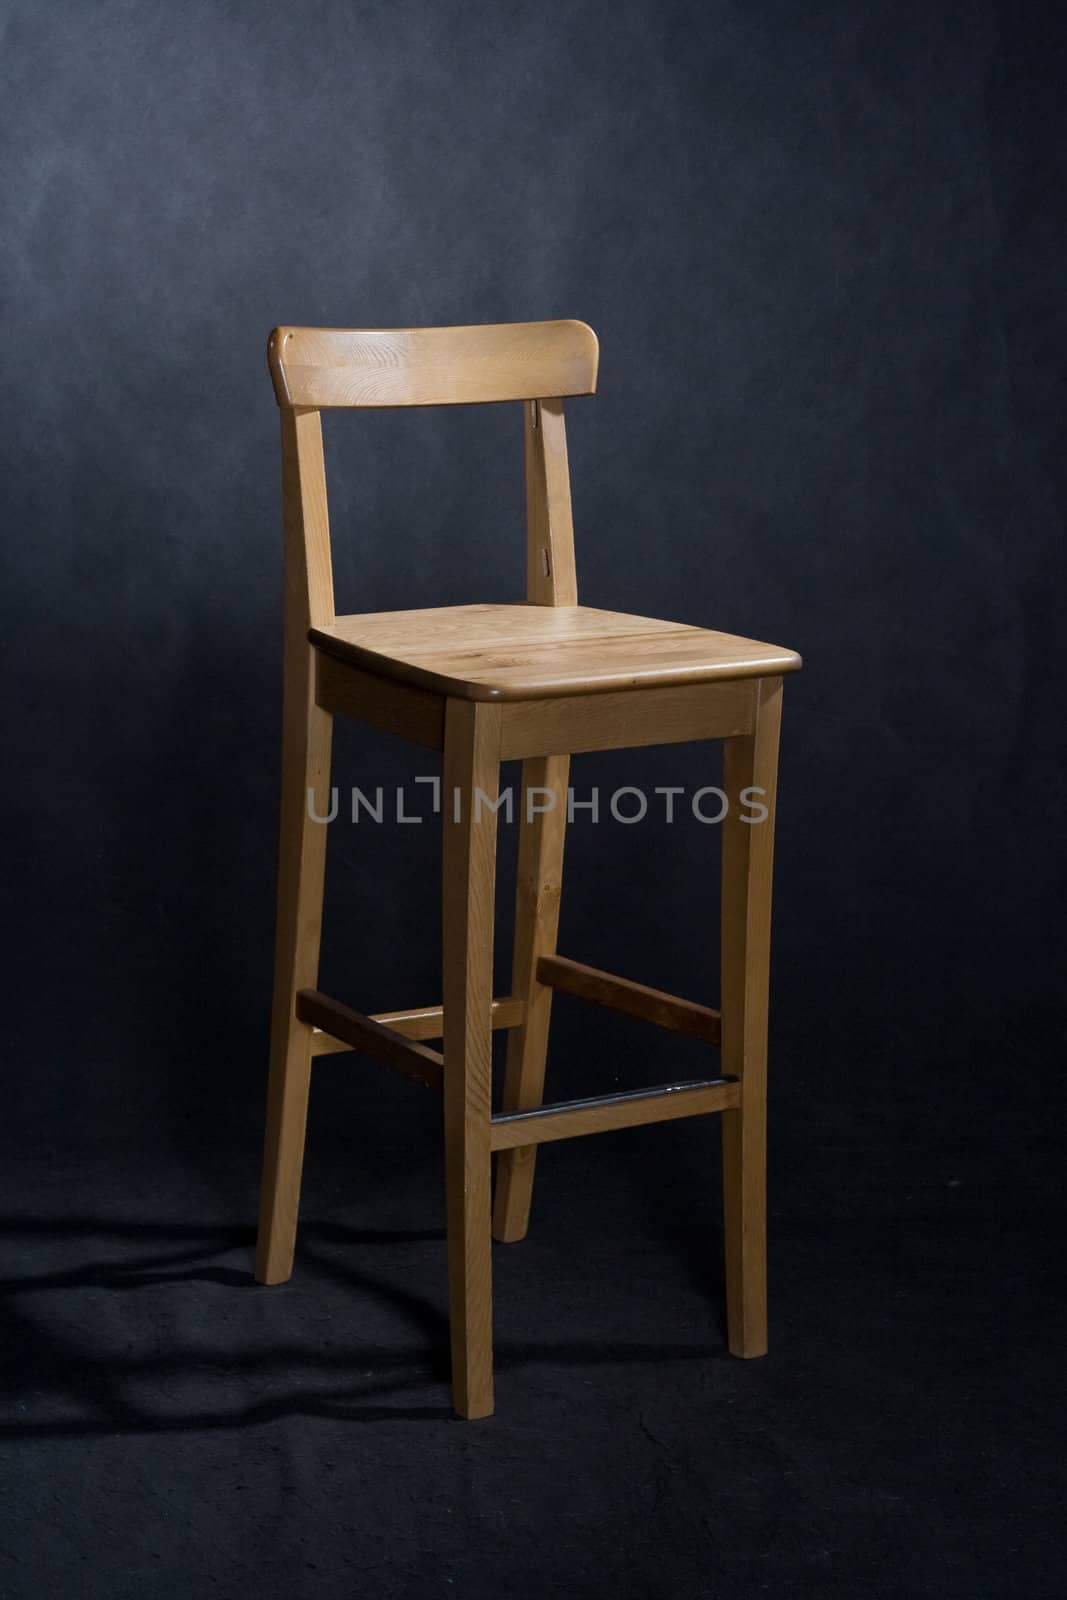 wooden lacquered chair on black
